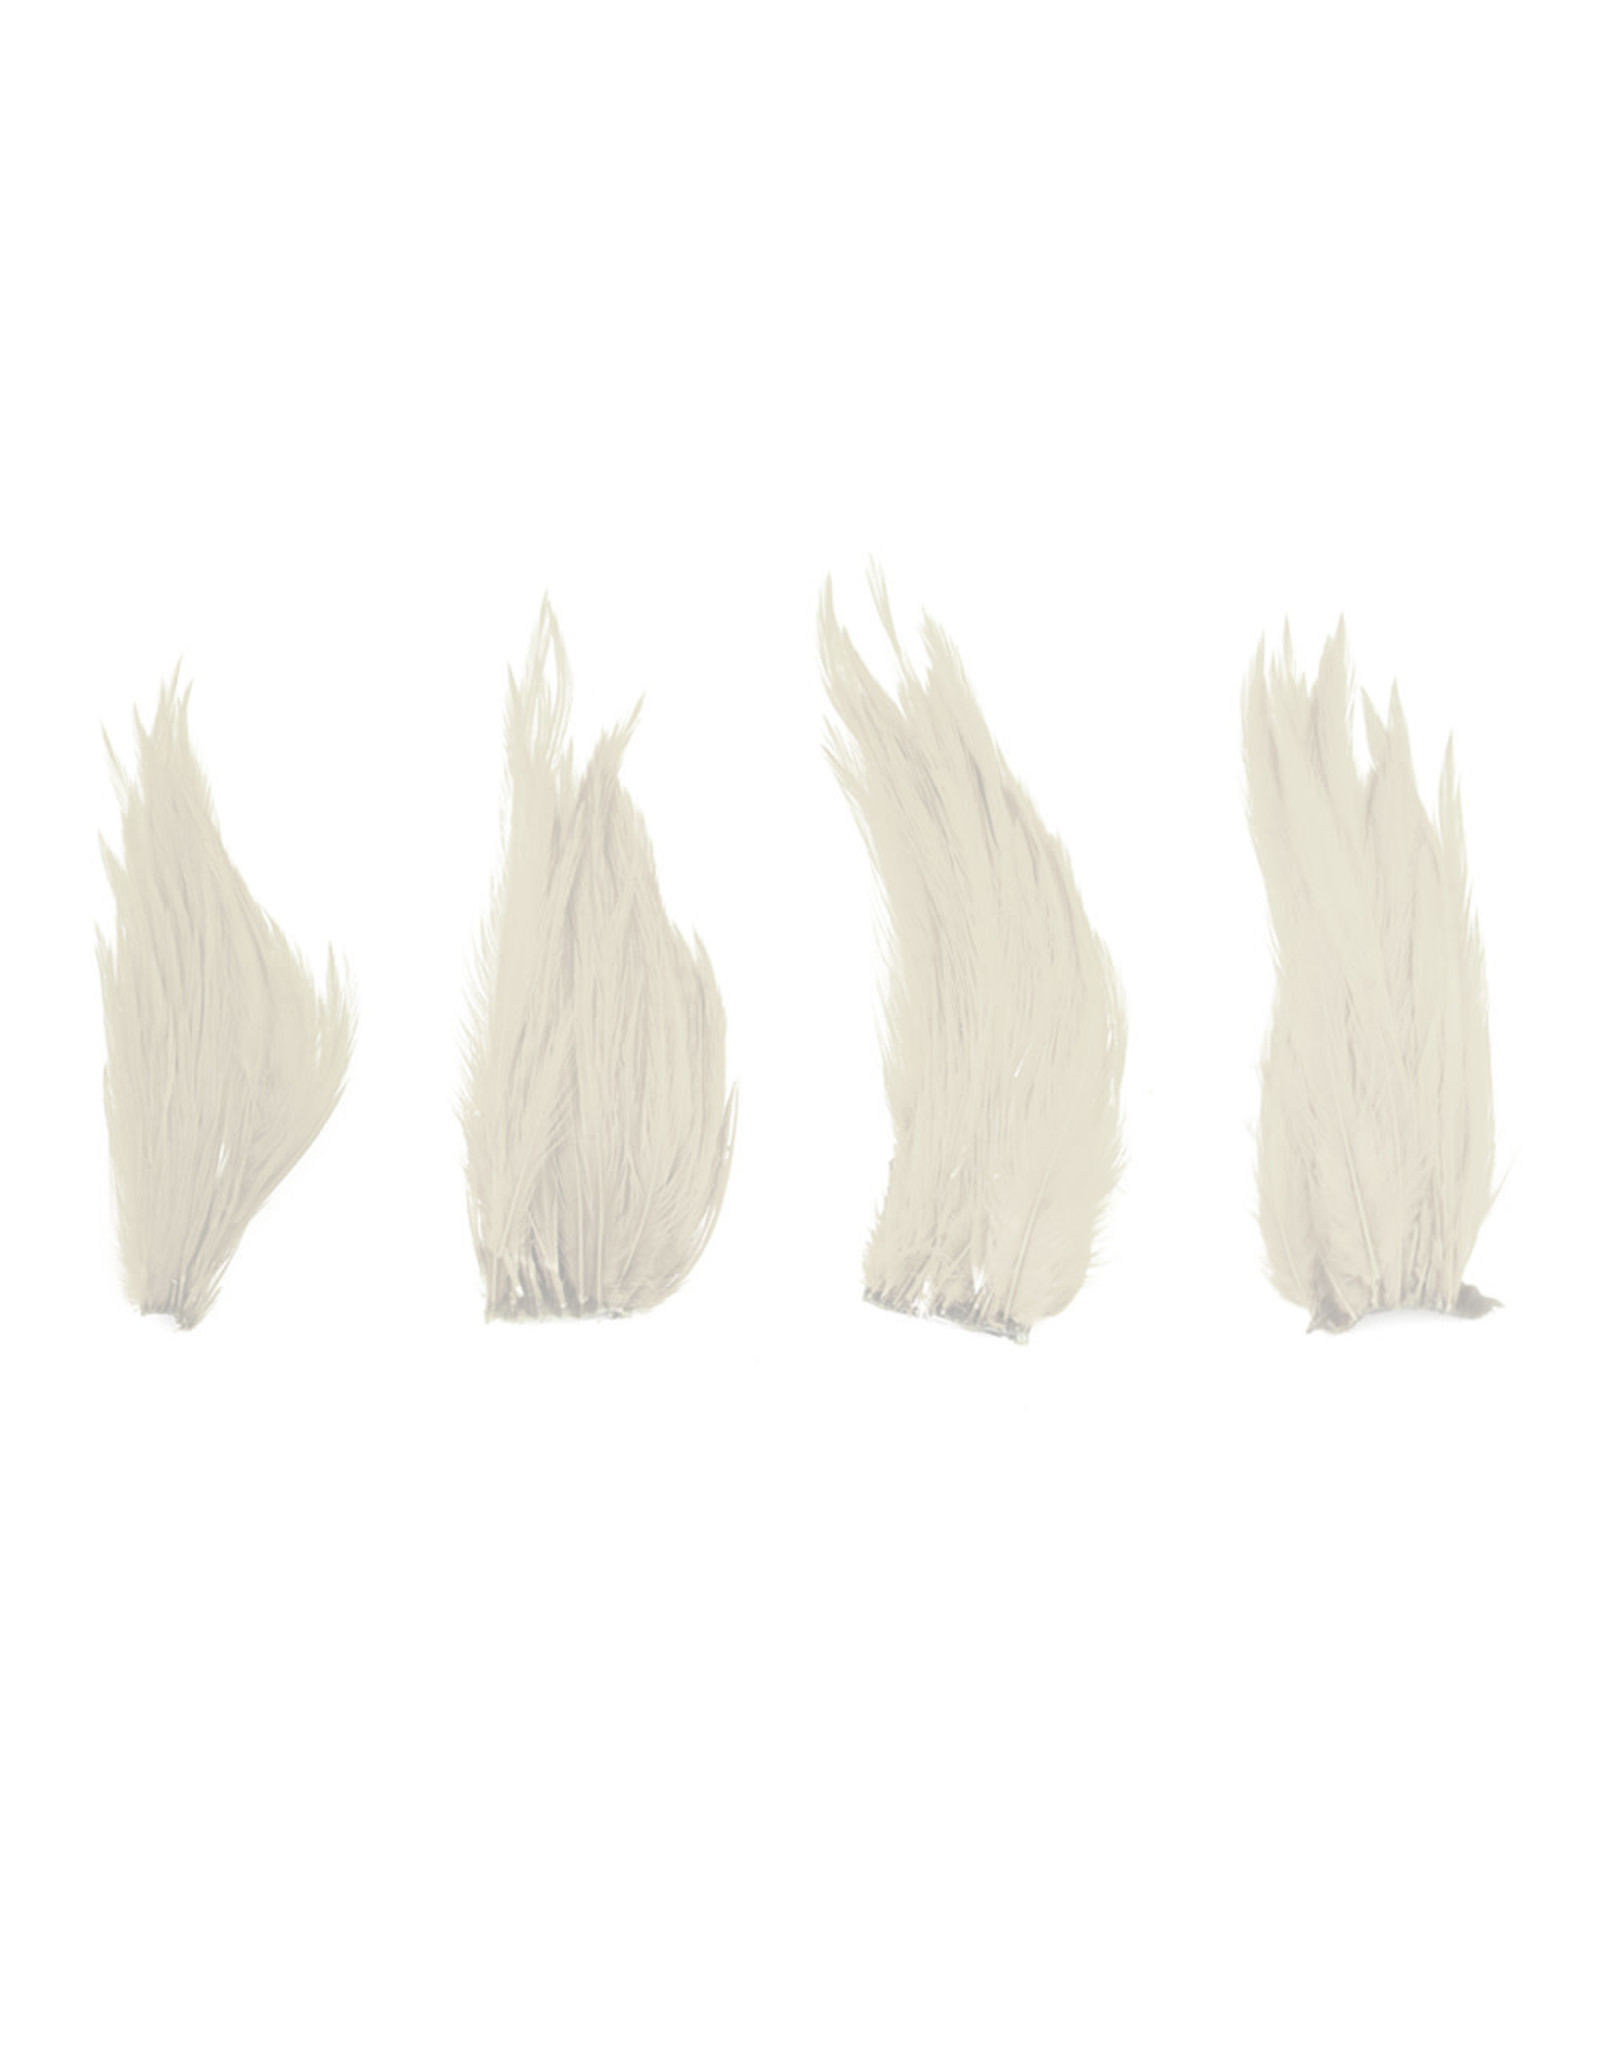 SHOR SHOR Genetic Rooster Mini Pack Size